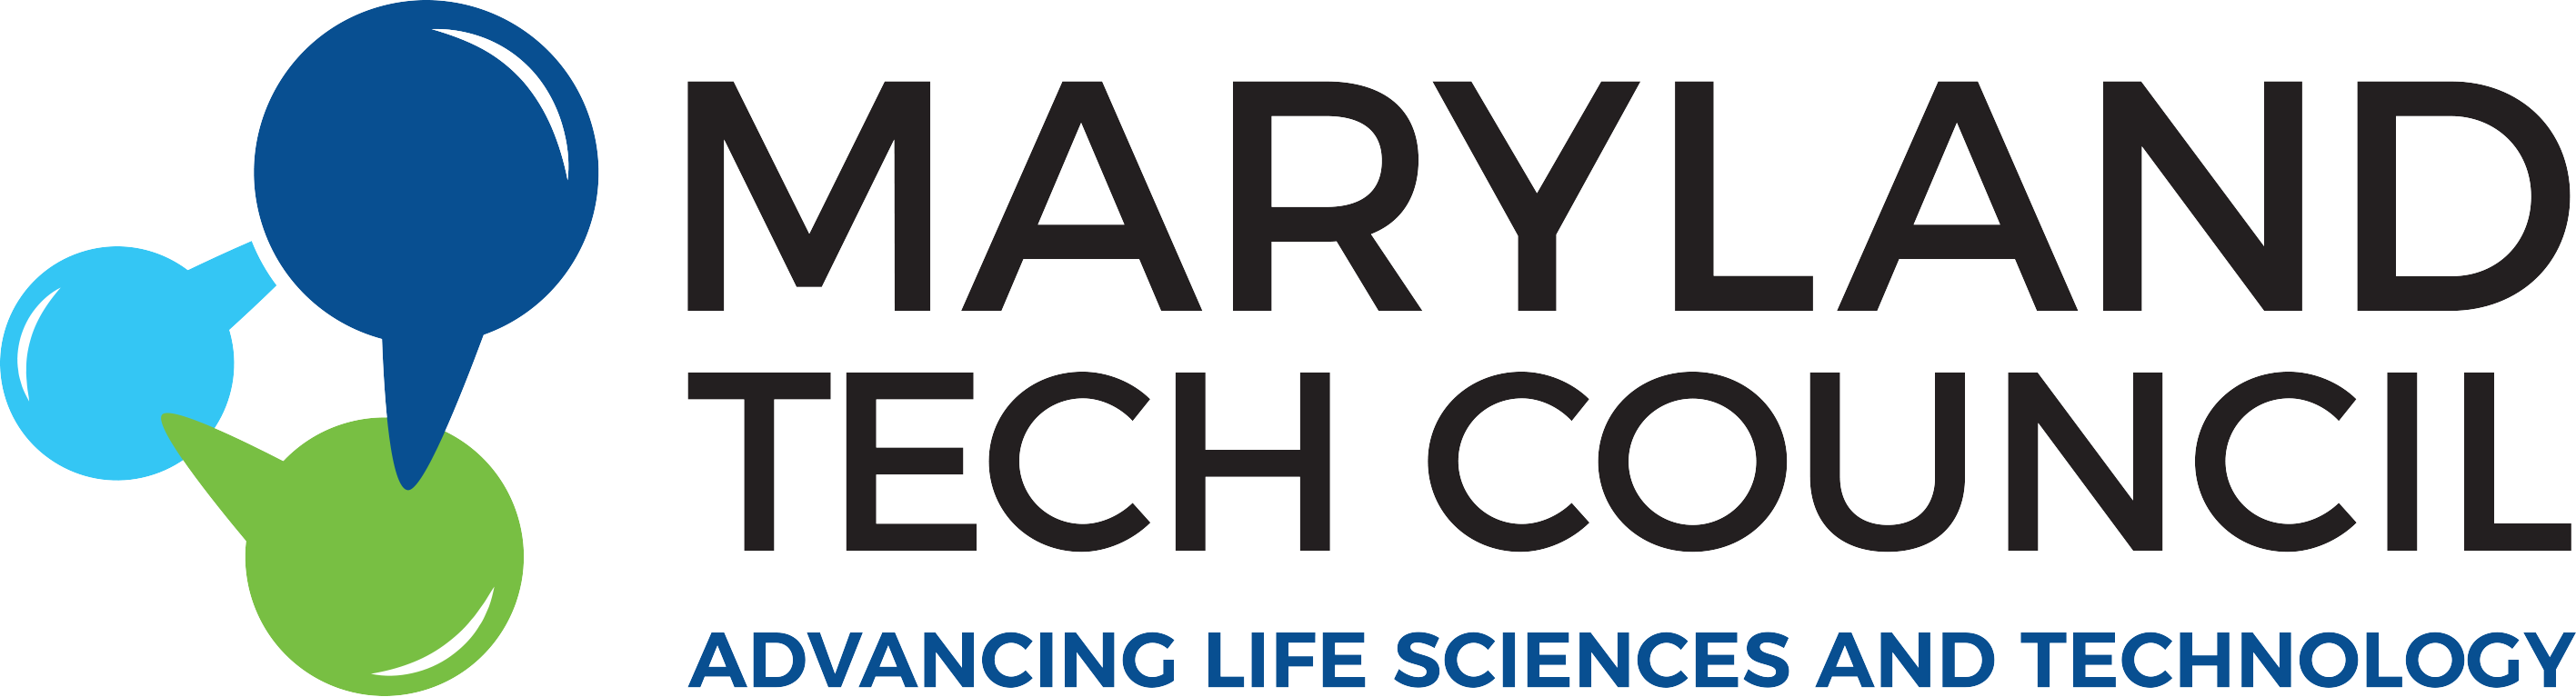 Maryland Tech Council Advancing Life Sciences and Technology